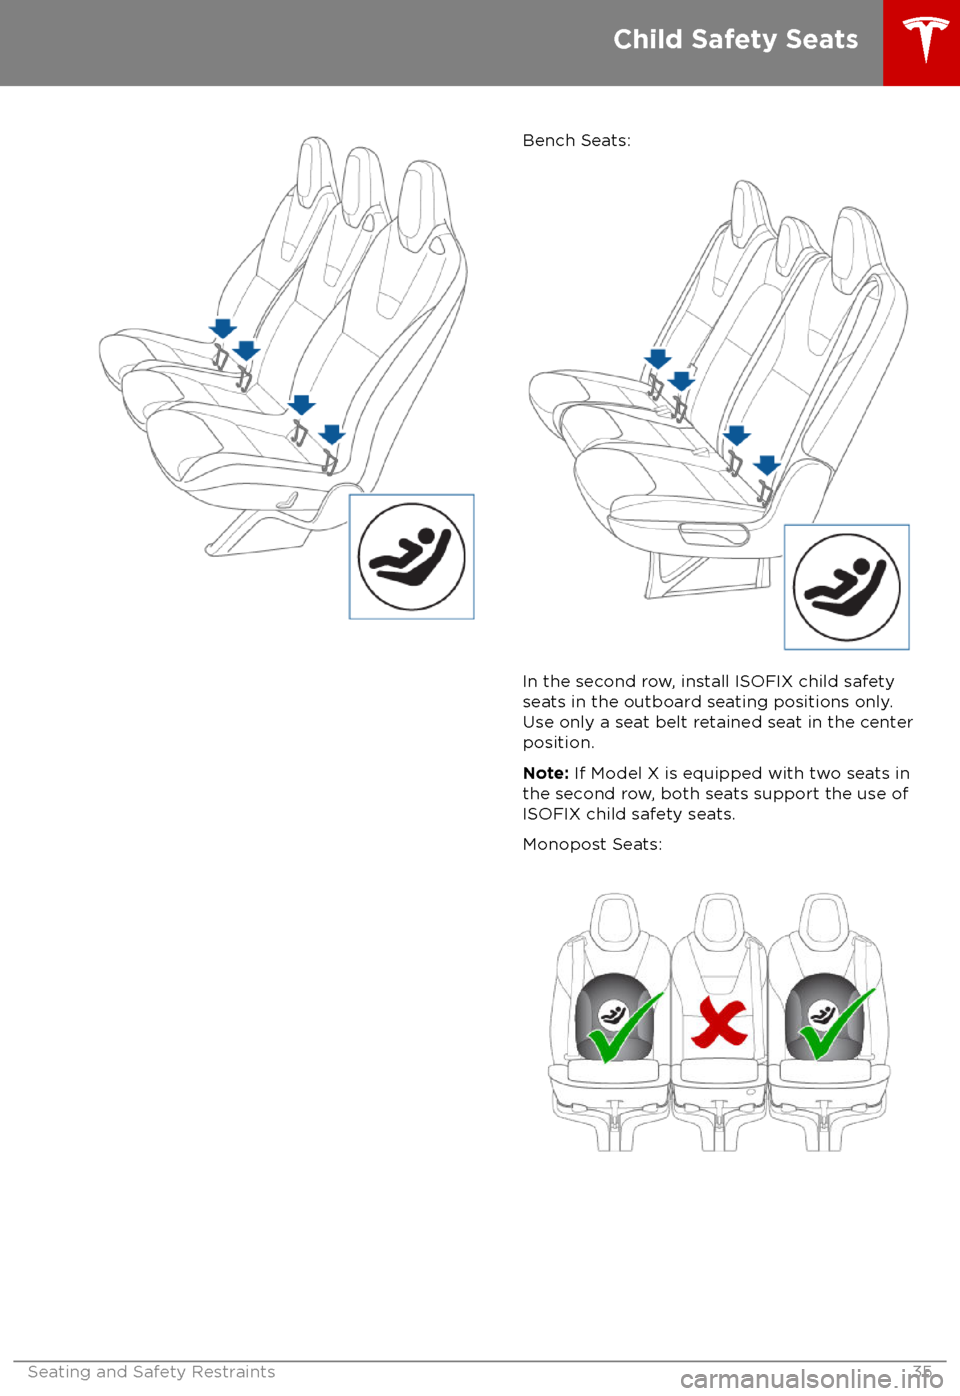 TESLA MODEL X 2018  Owners Manual  Bench Seats:
In the second row, install ISOFIX child safety
seats in the outboard seating positions only.
Use only a seat belt retained seat in the center
position.
Note:  If Model X is equipped with 